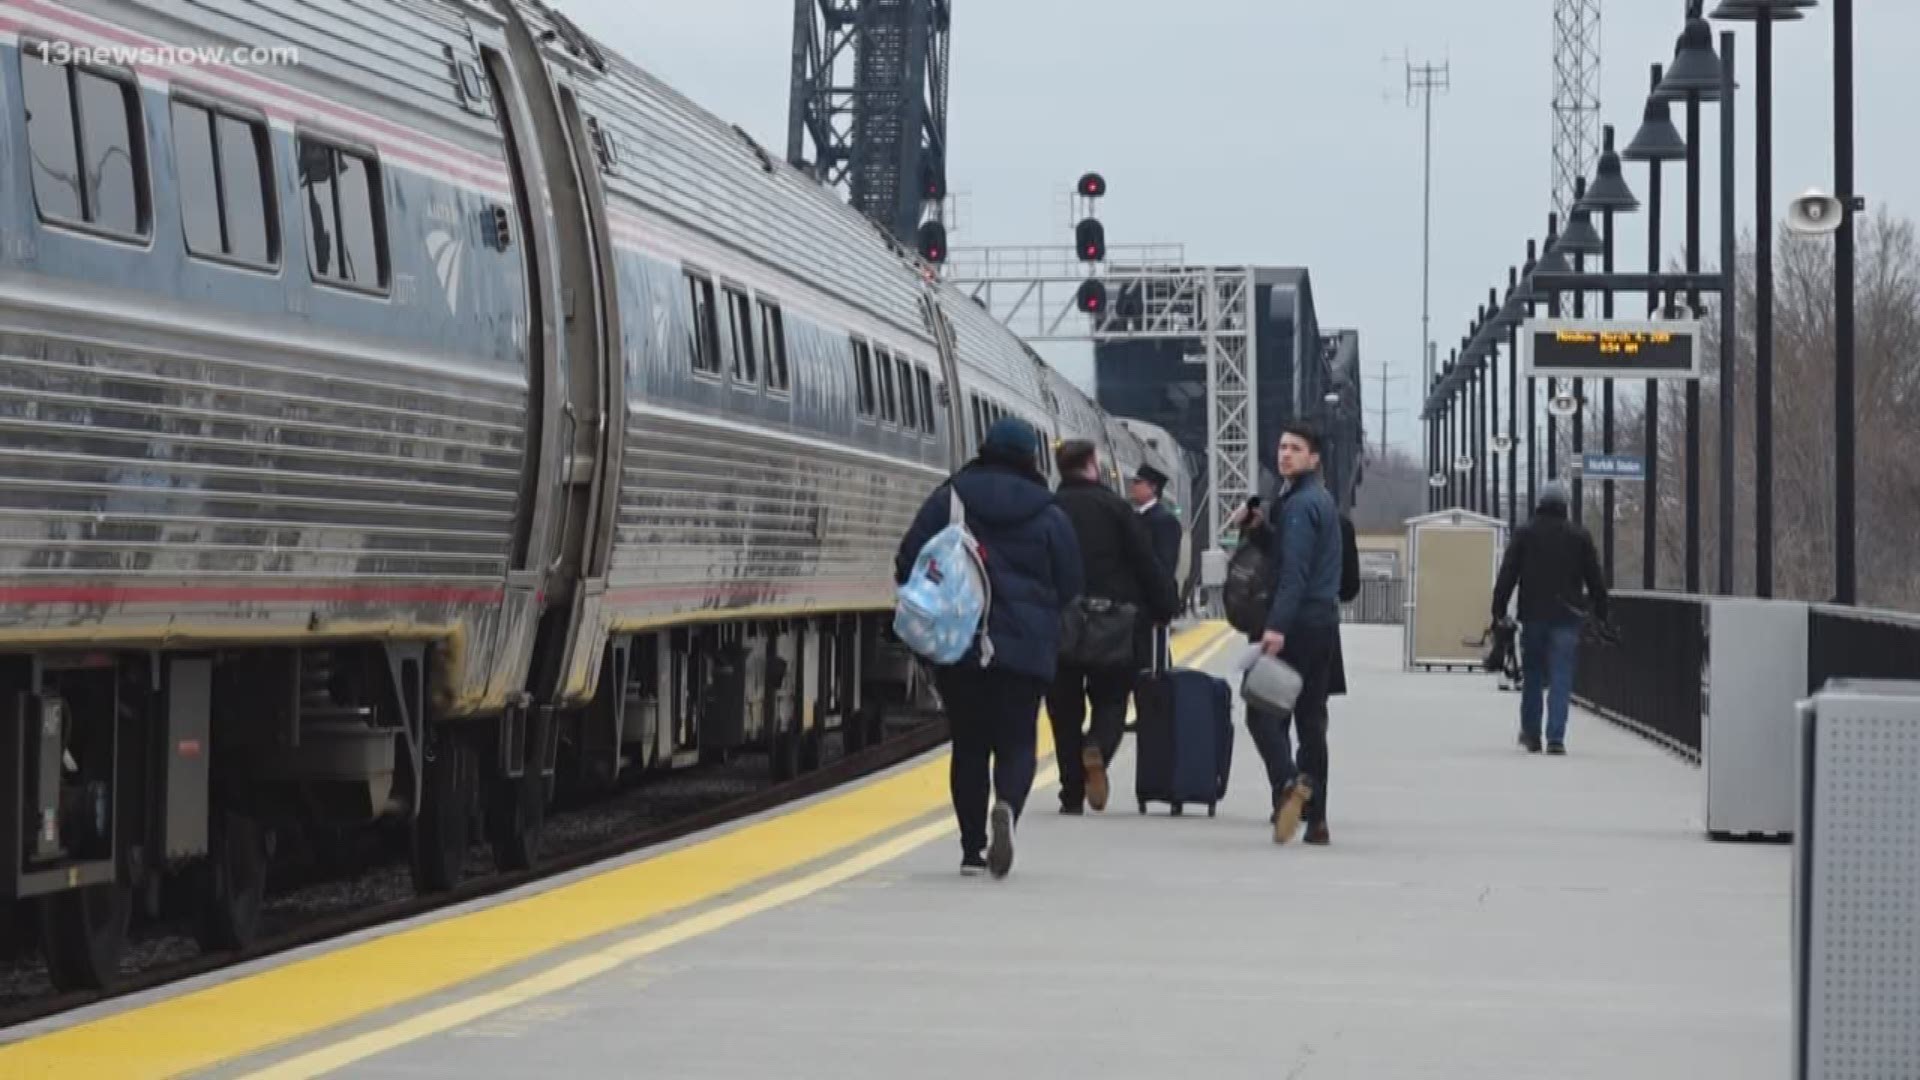 Governor Northam proposed a plan to improve the service in Norfolk and on the rails headed to Washington D.C.